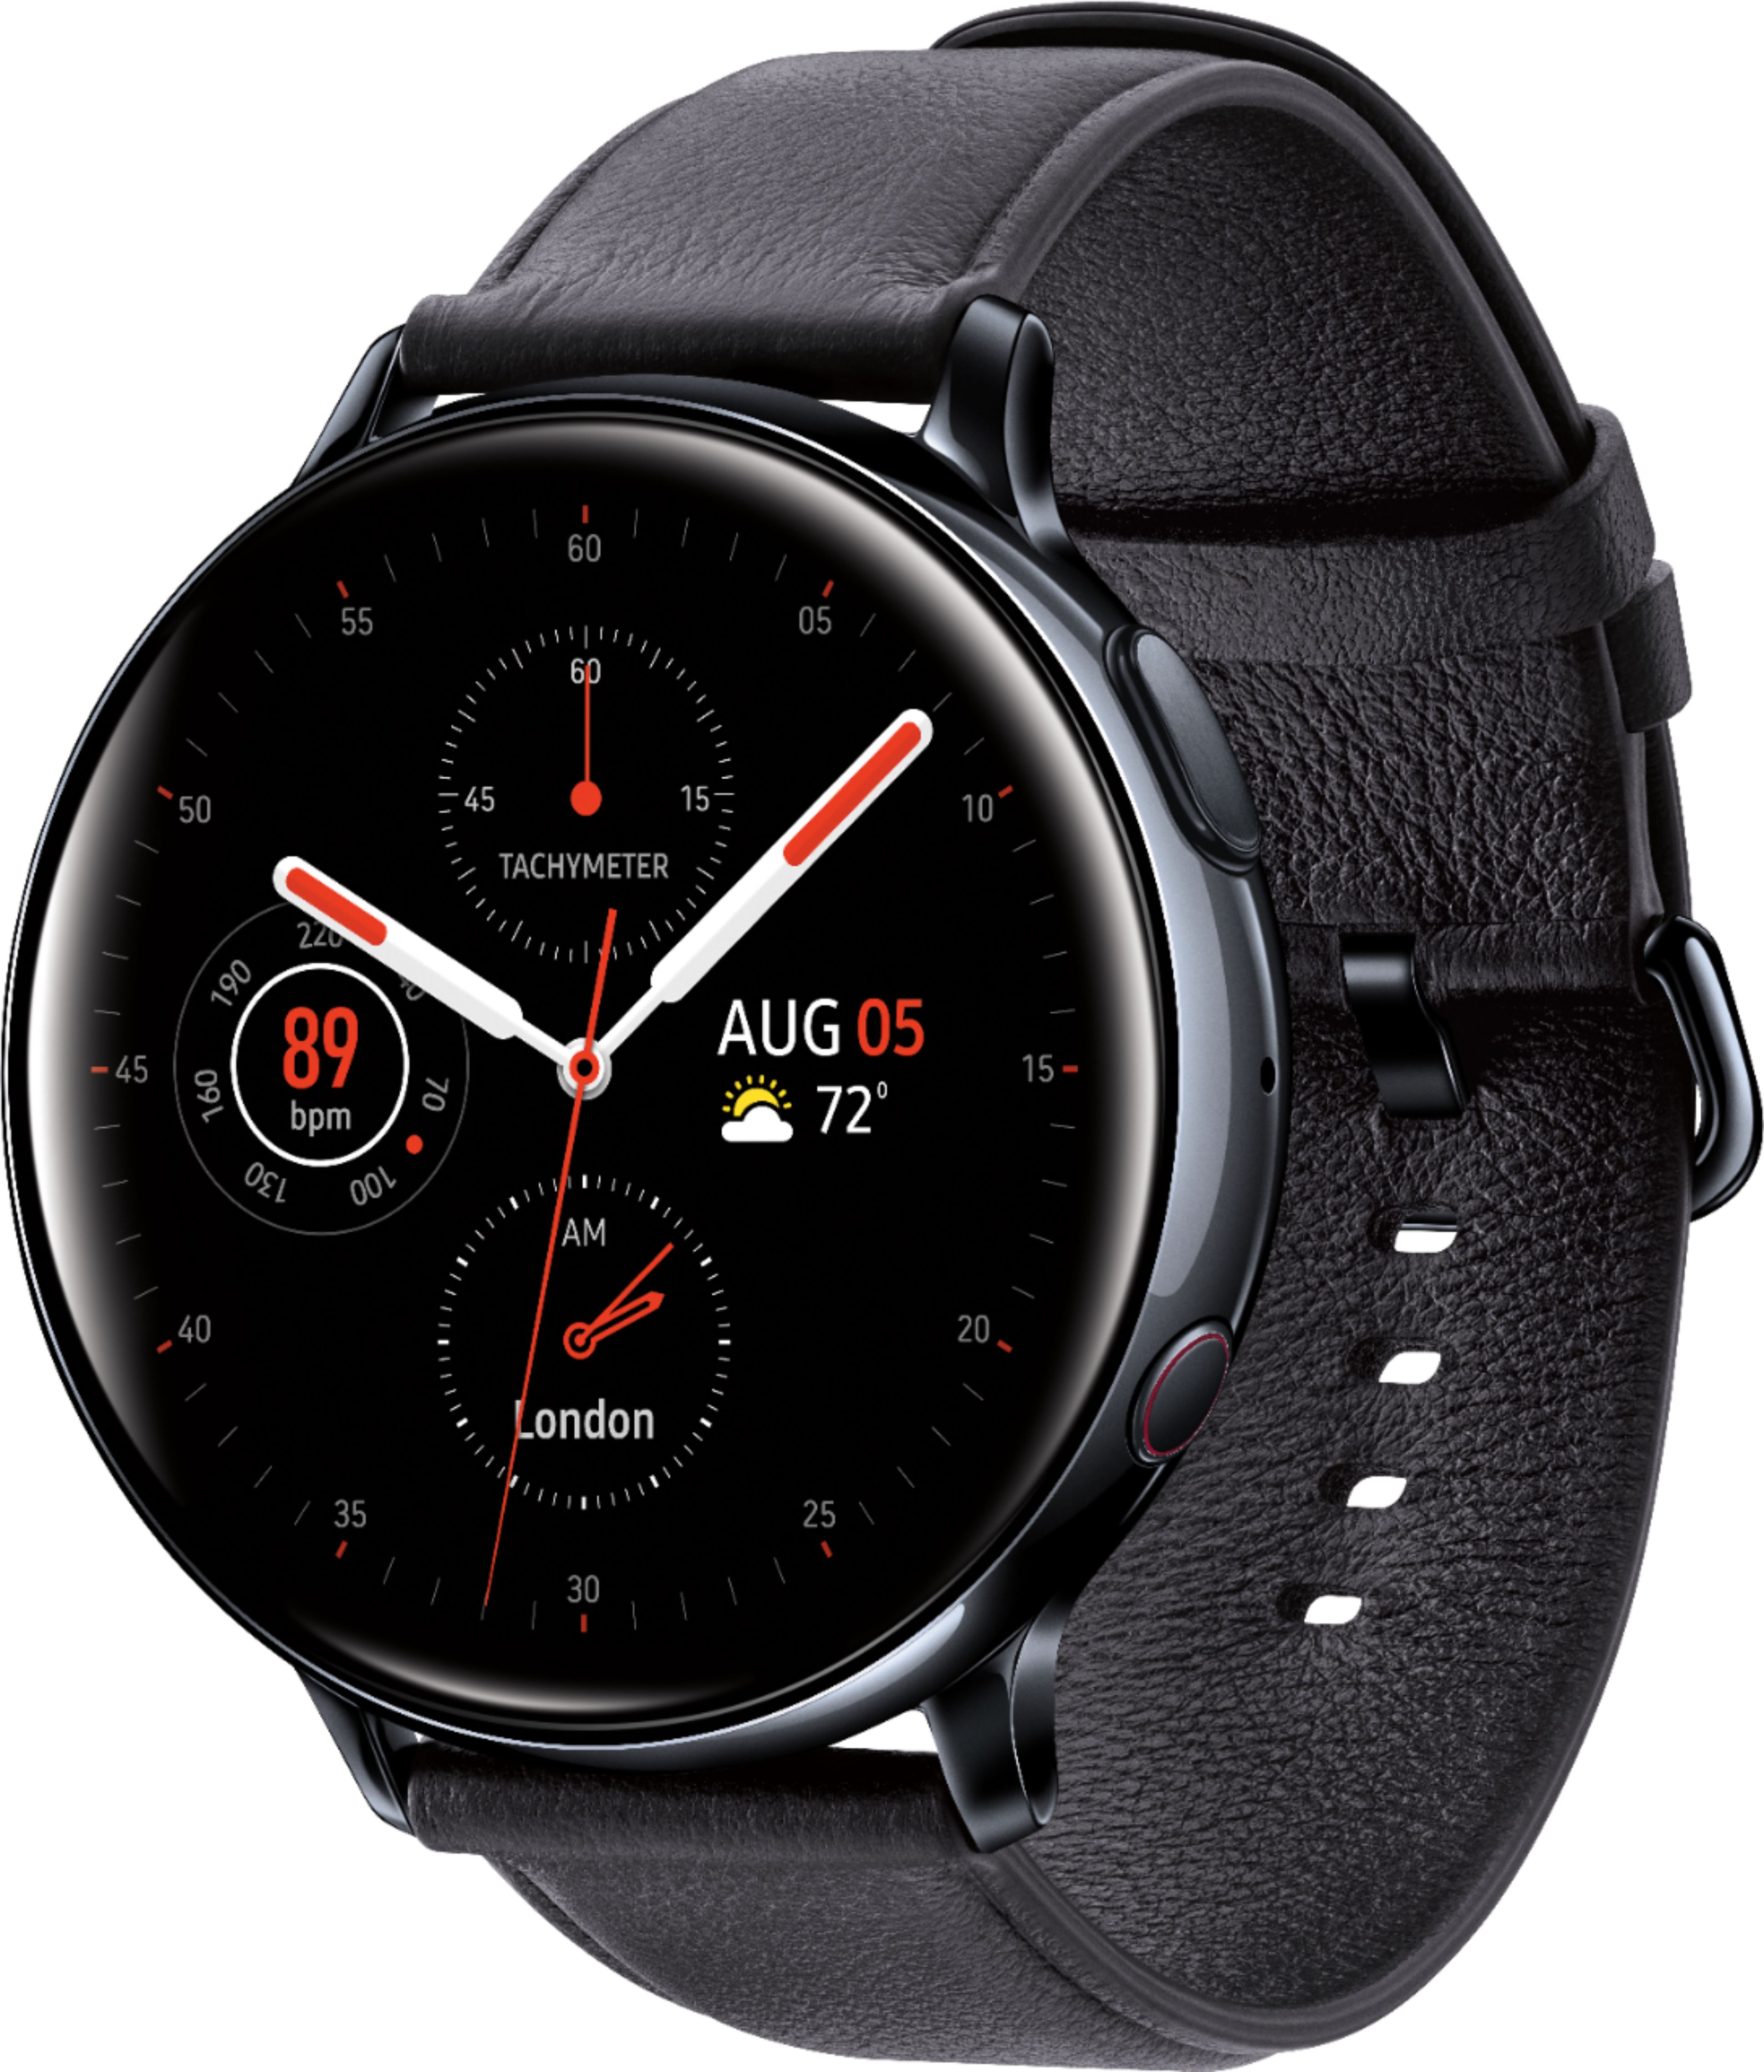 Angle View: Amazfit - Stratos 3 Smartwatch 49mm Stainless Steel - Black